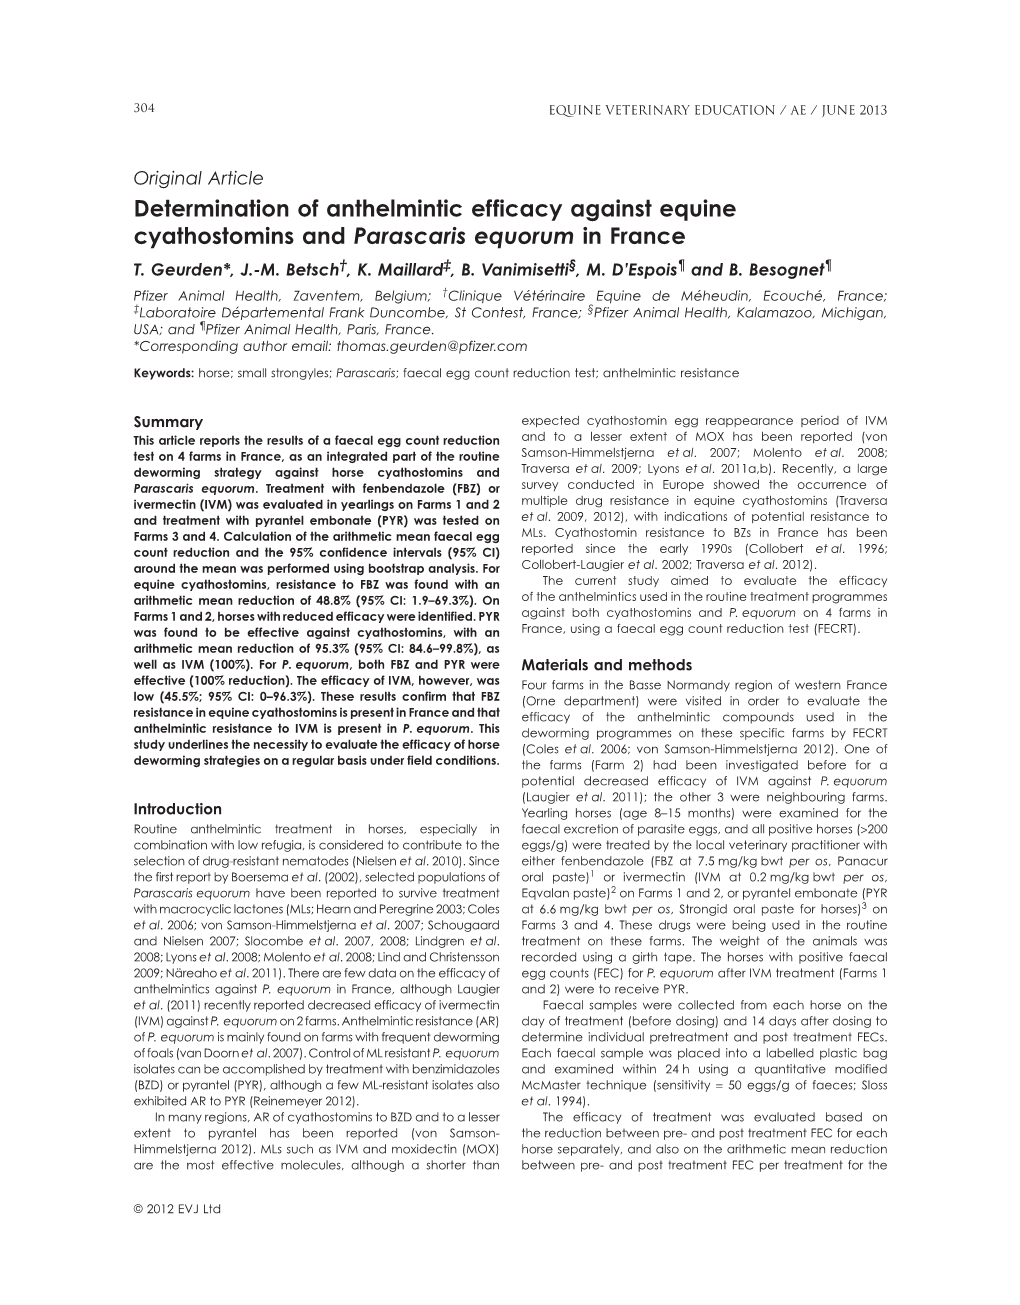 Determination of Anthelmintic Efficacy Against Equine Cyathostomins and Parascaris Equorum in France T